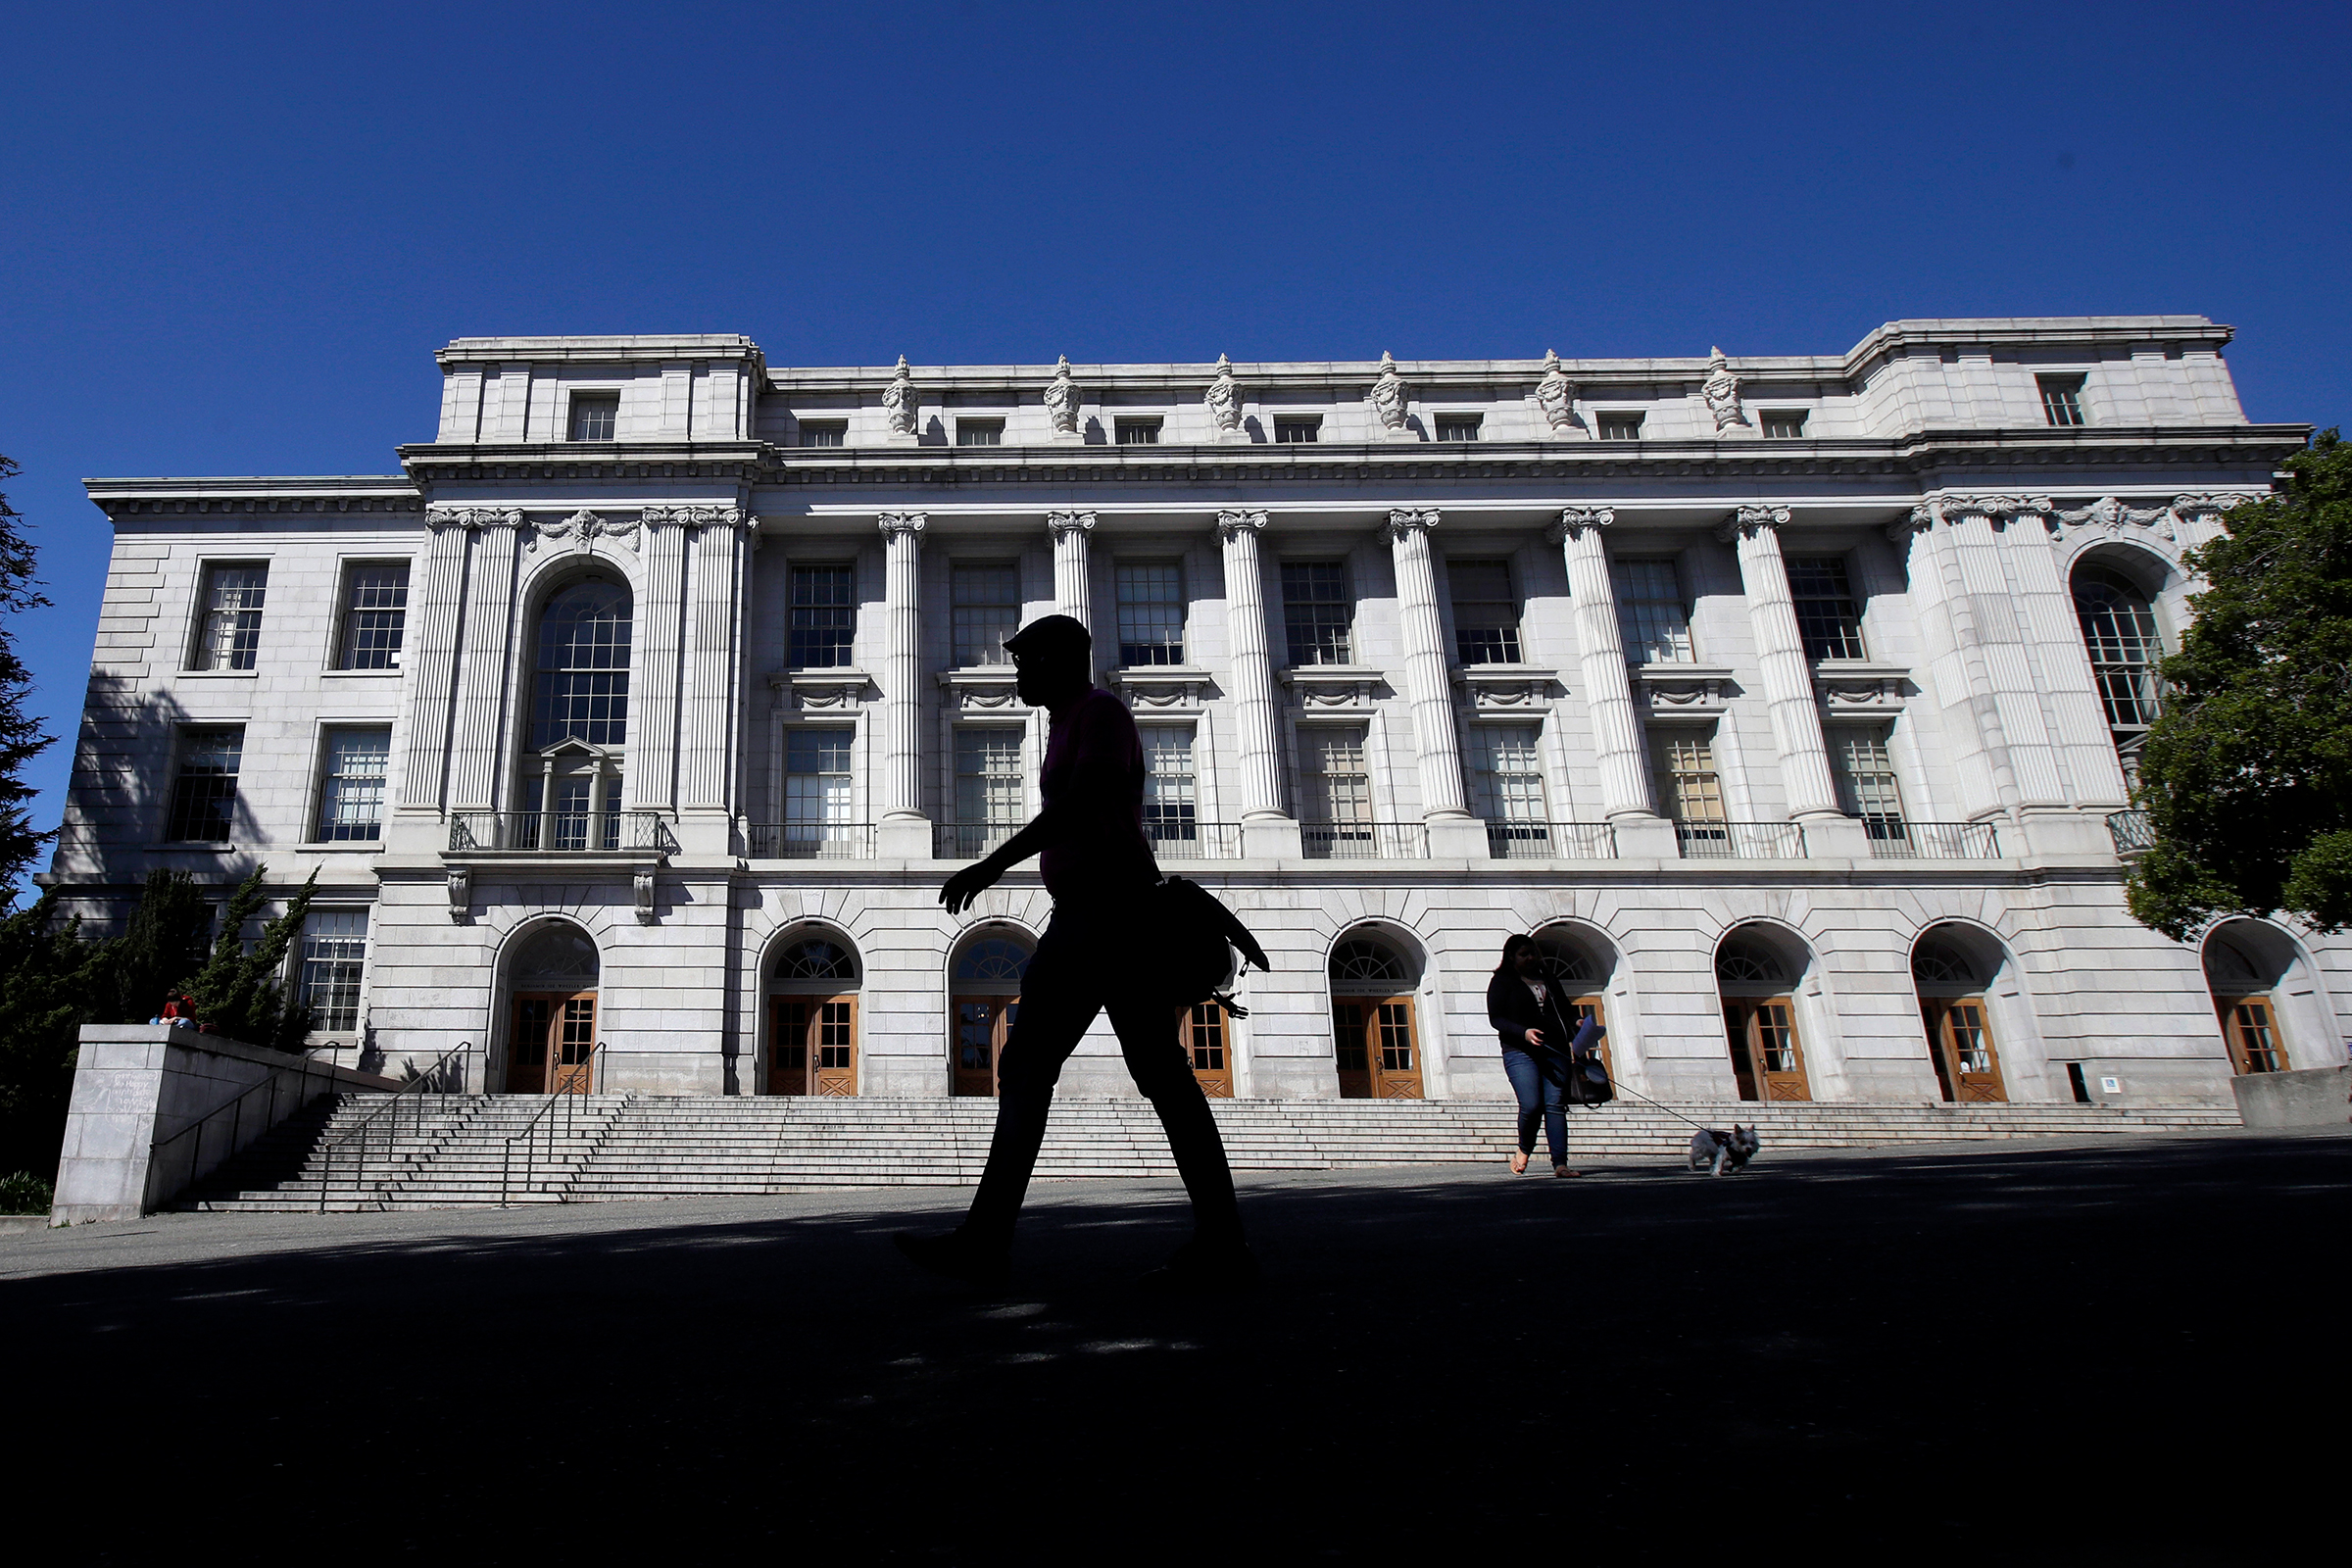 People walk in front of Wheeler Hall on the University of California campus in Berkeley, Calif., on March 11, 2020. (Jeff Chiu—AP)